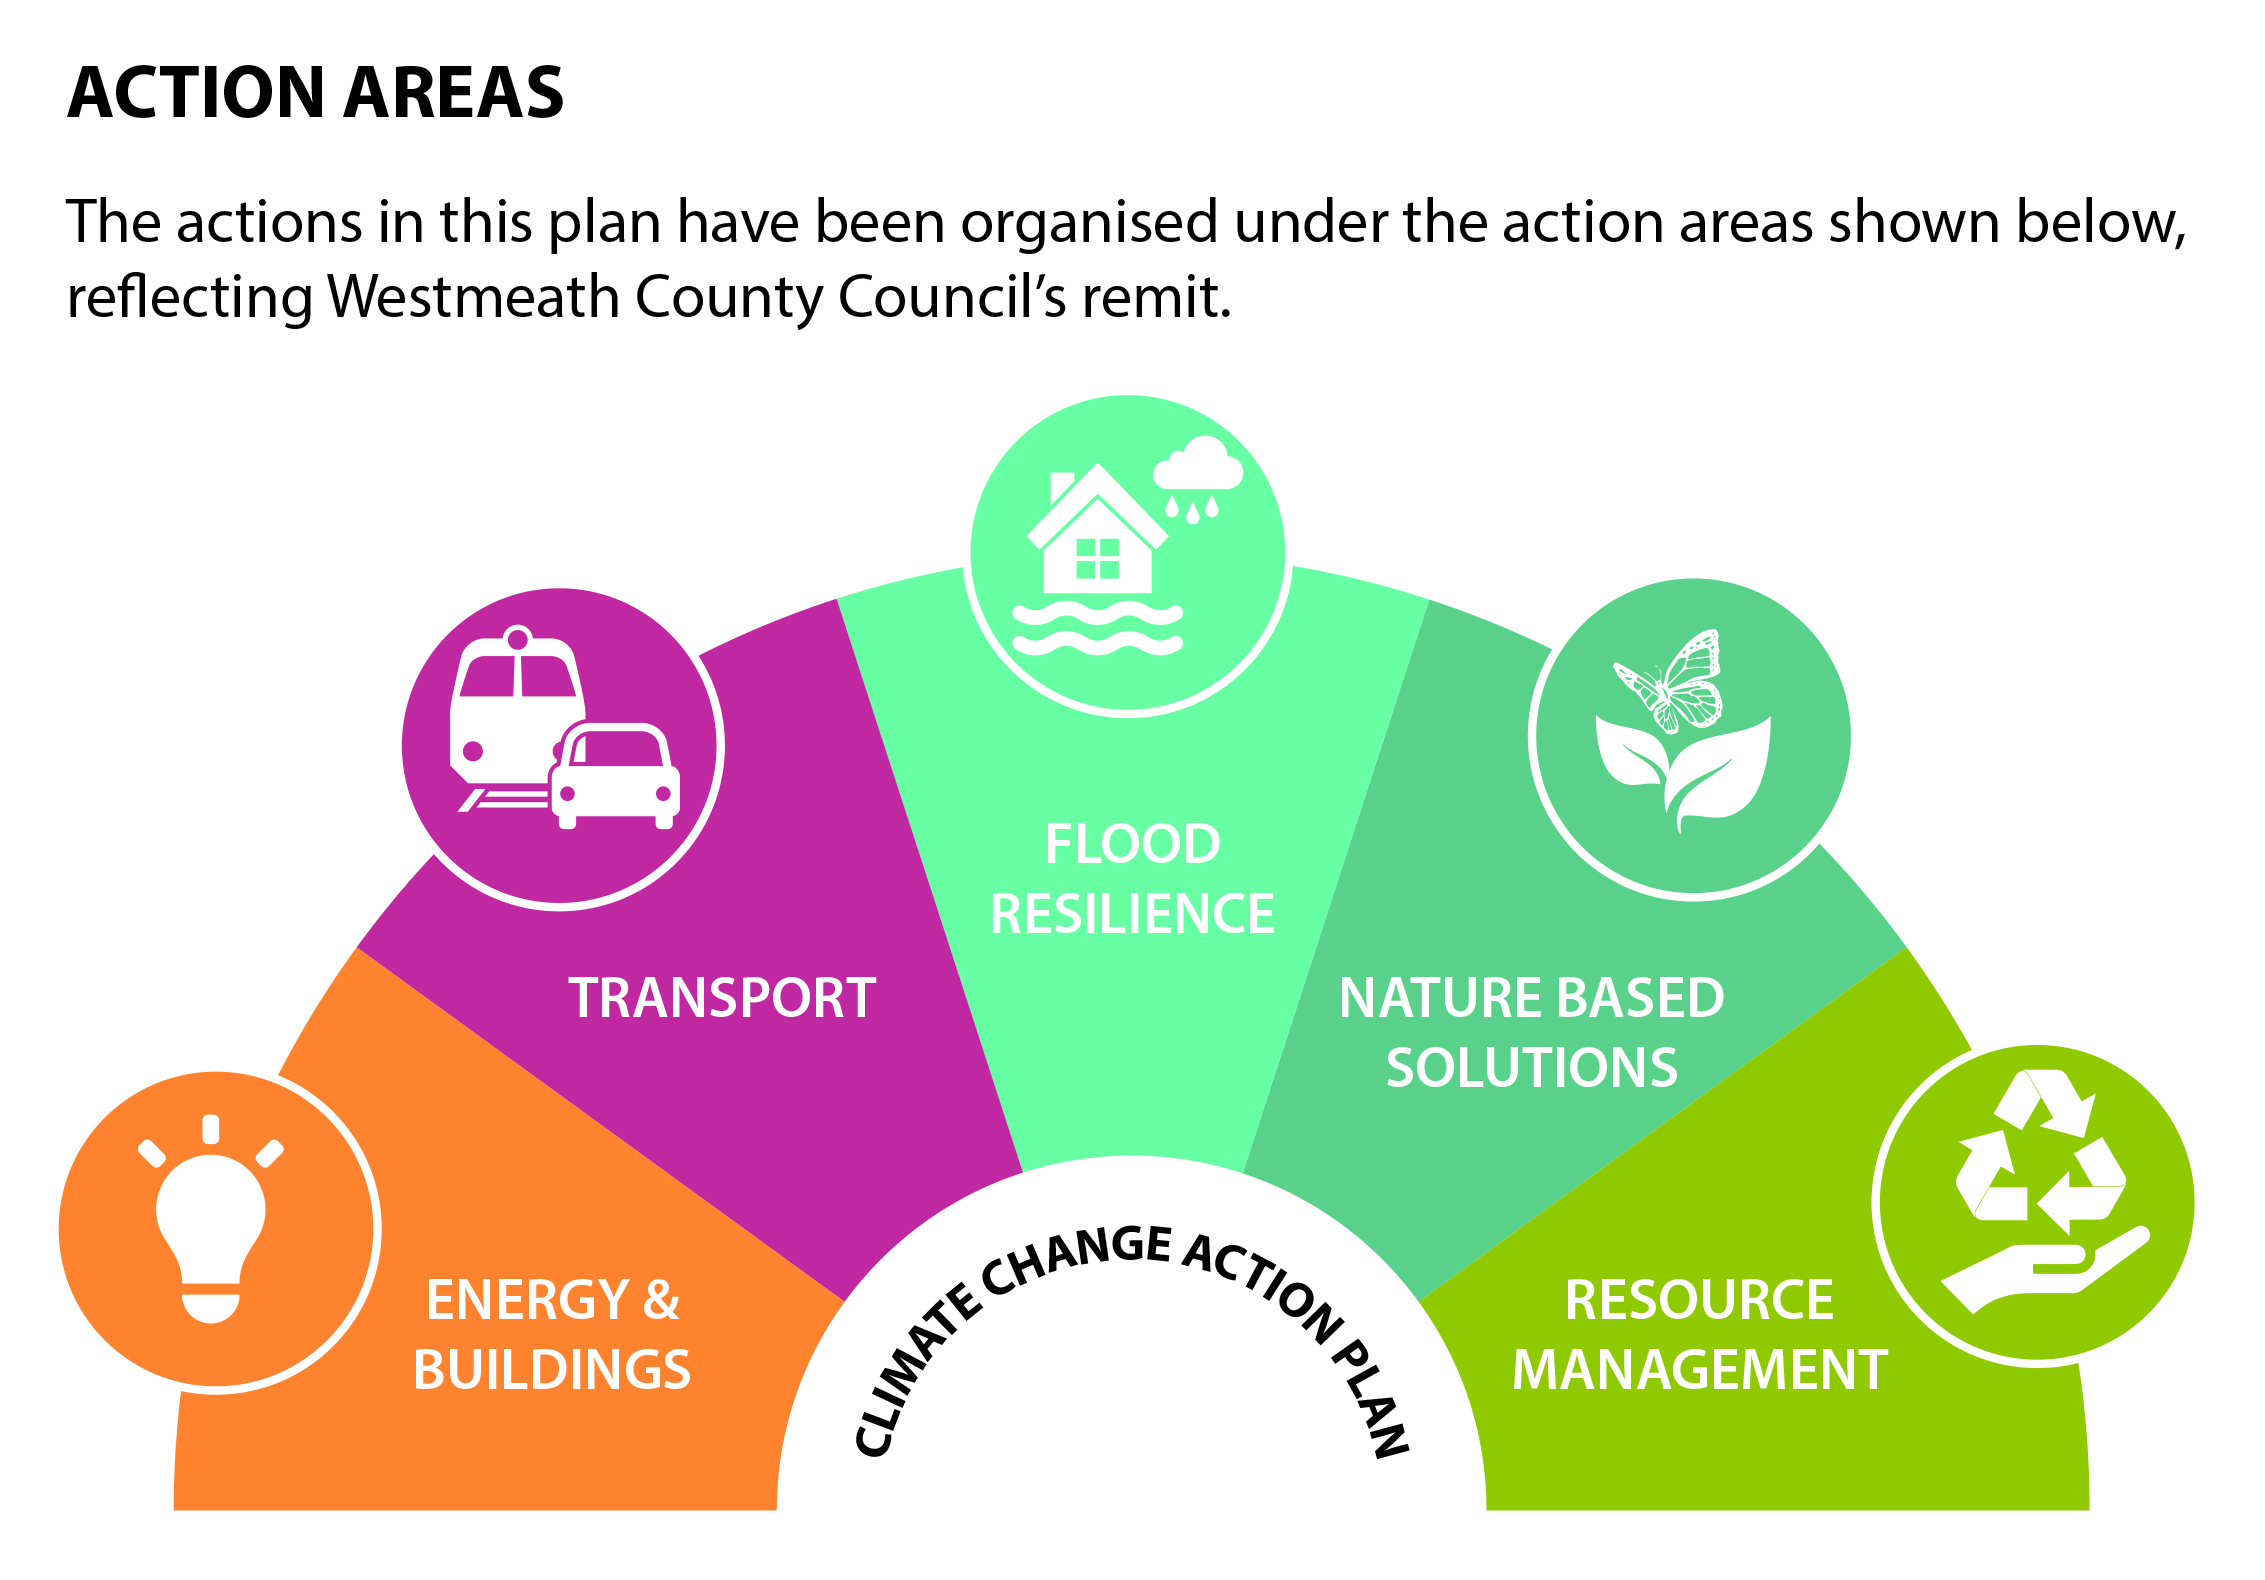 FIgure 11.7 Outlines the areas which are being addressed through proposed mitigation and adaptation measures in the Draft Plan